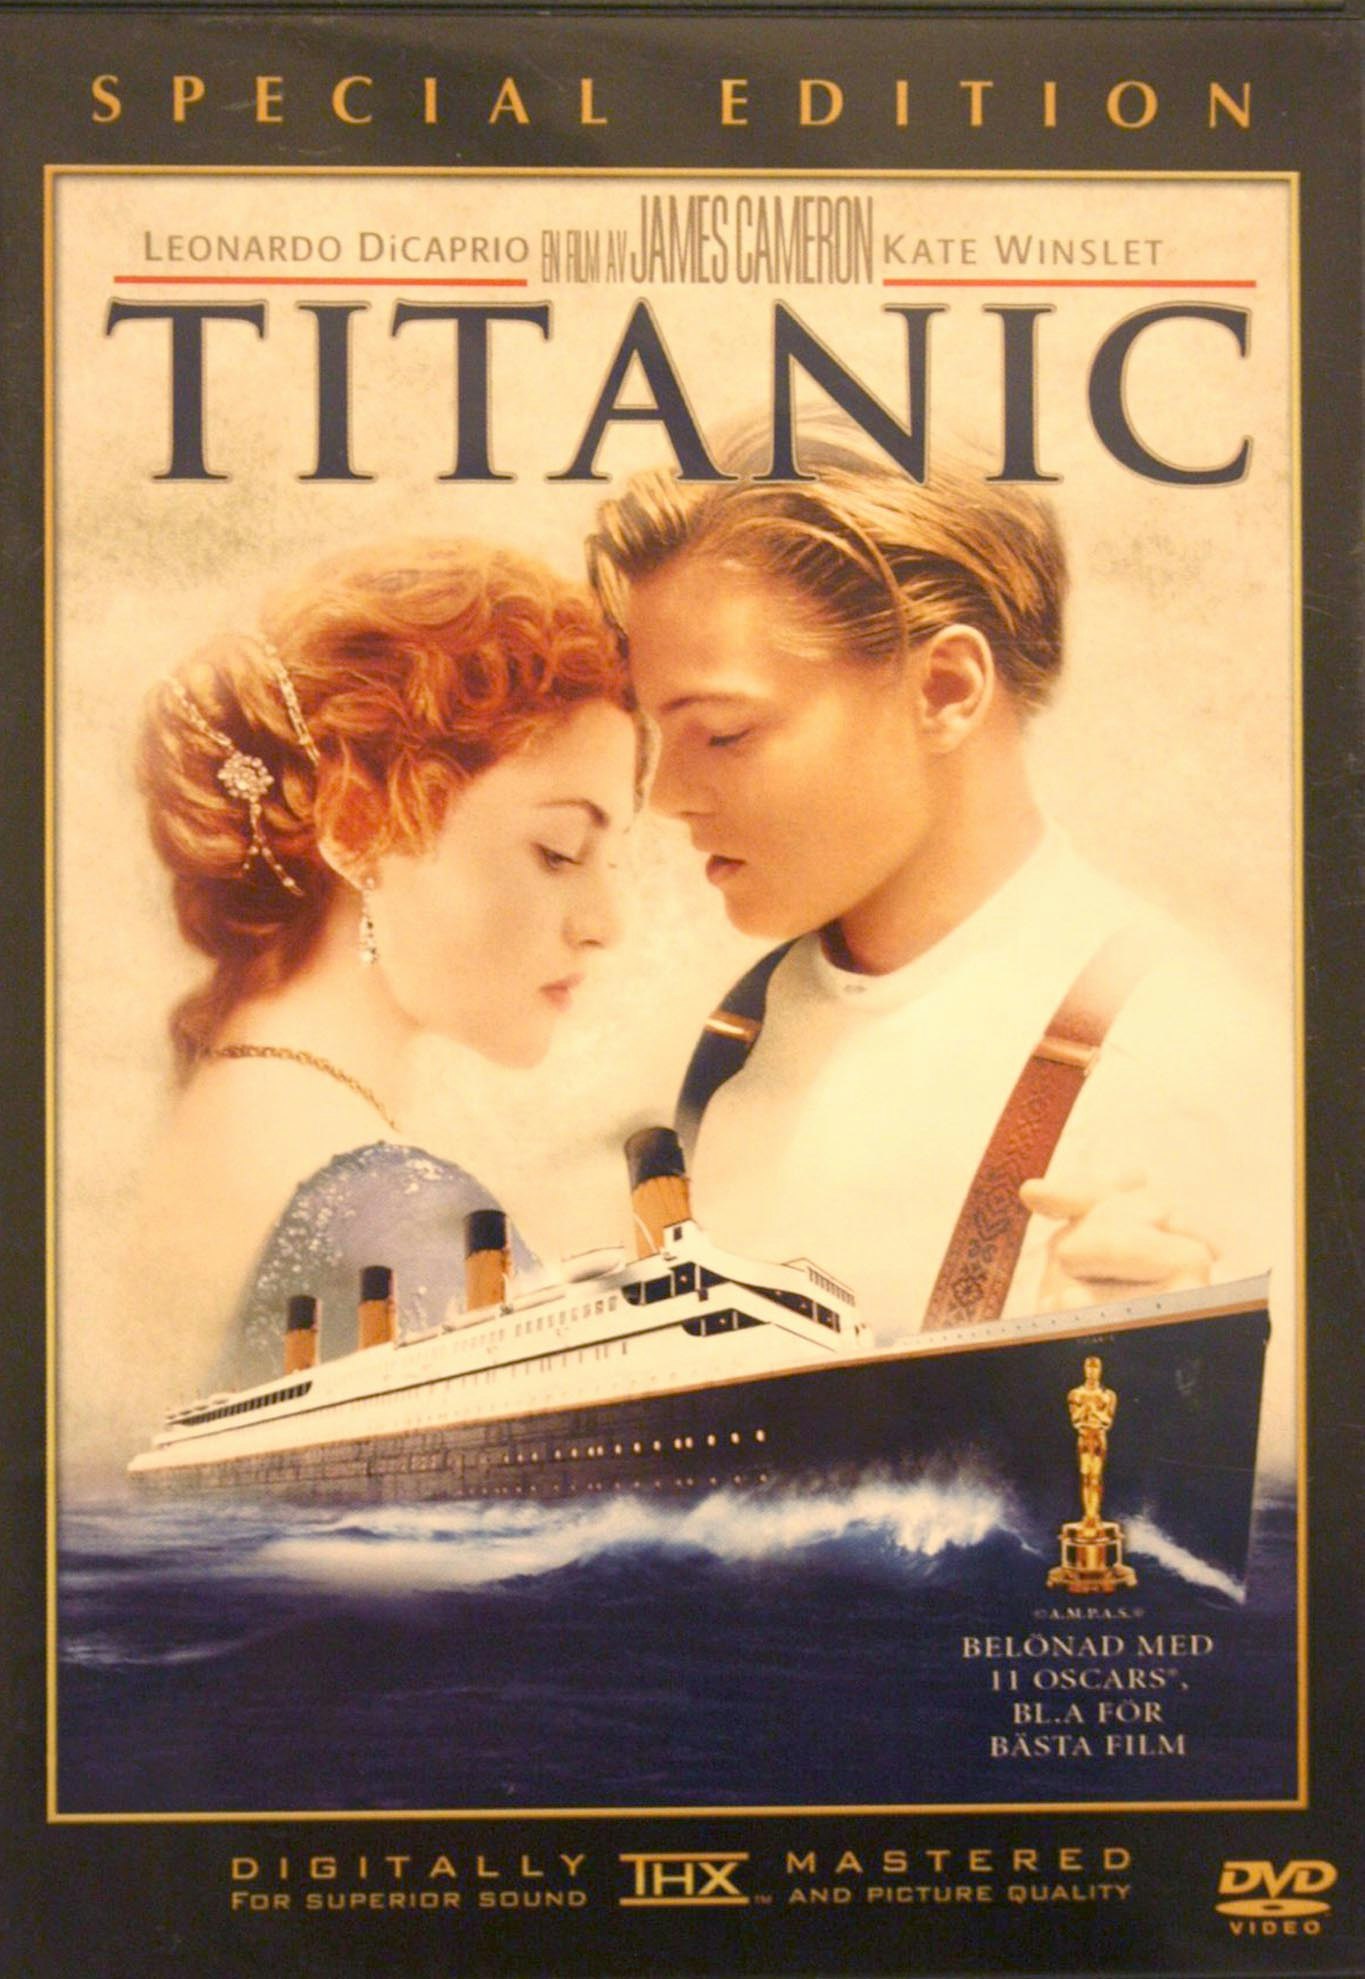 Titanic - Special Edition (Beg. 2 disc DVD)